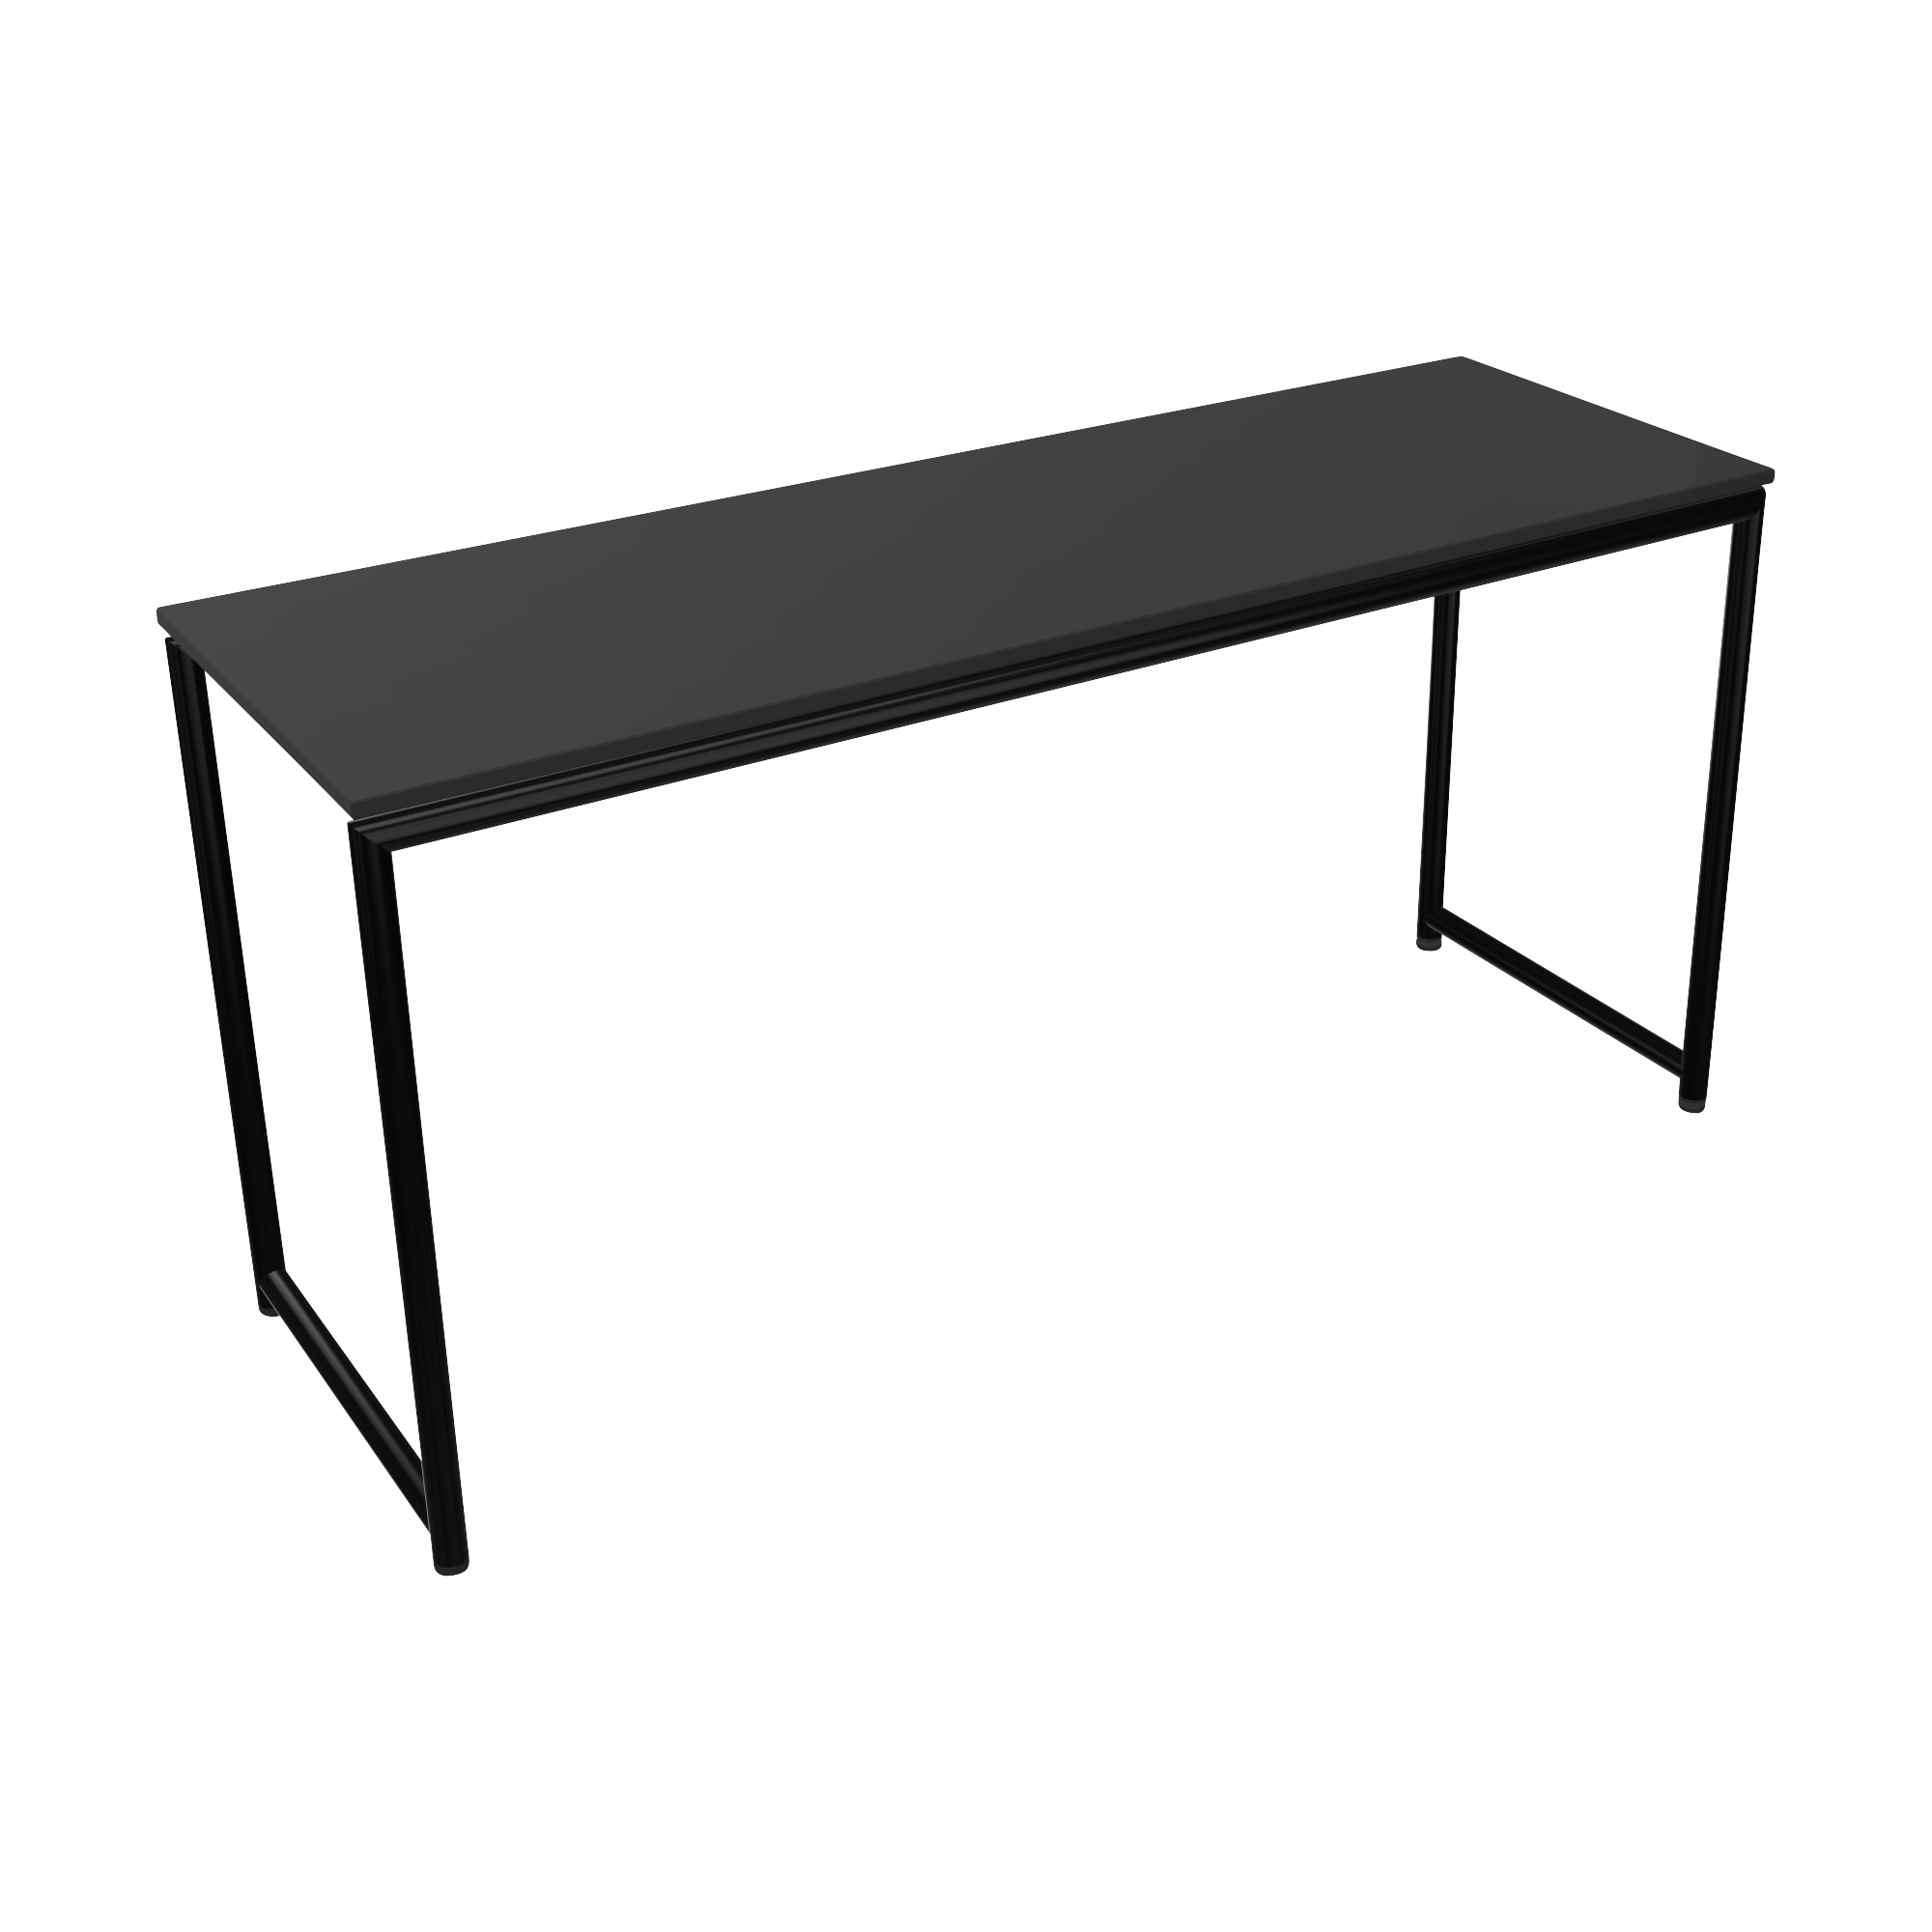 A long black desk with a metal frame and two legs